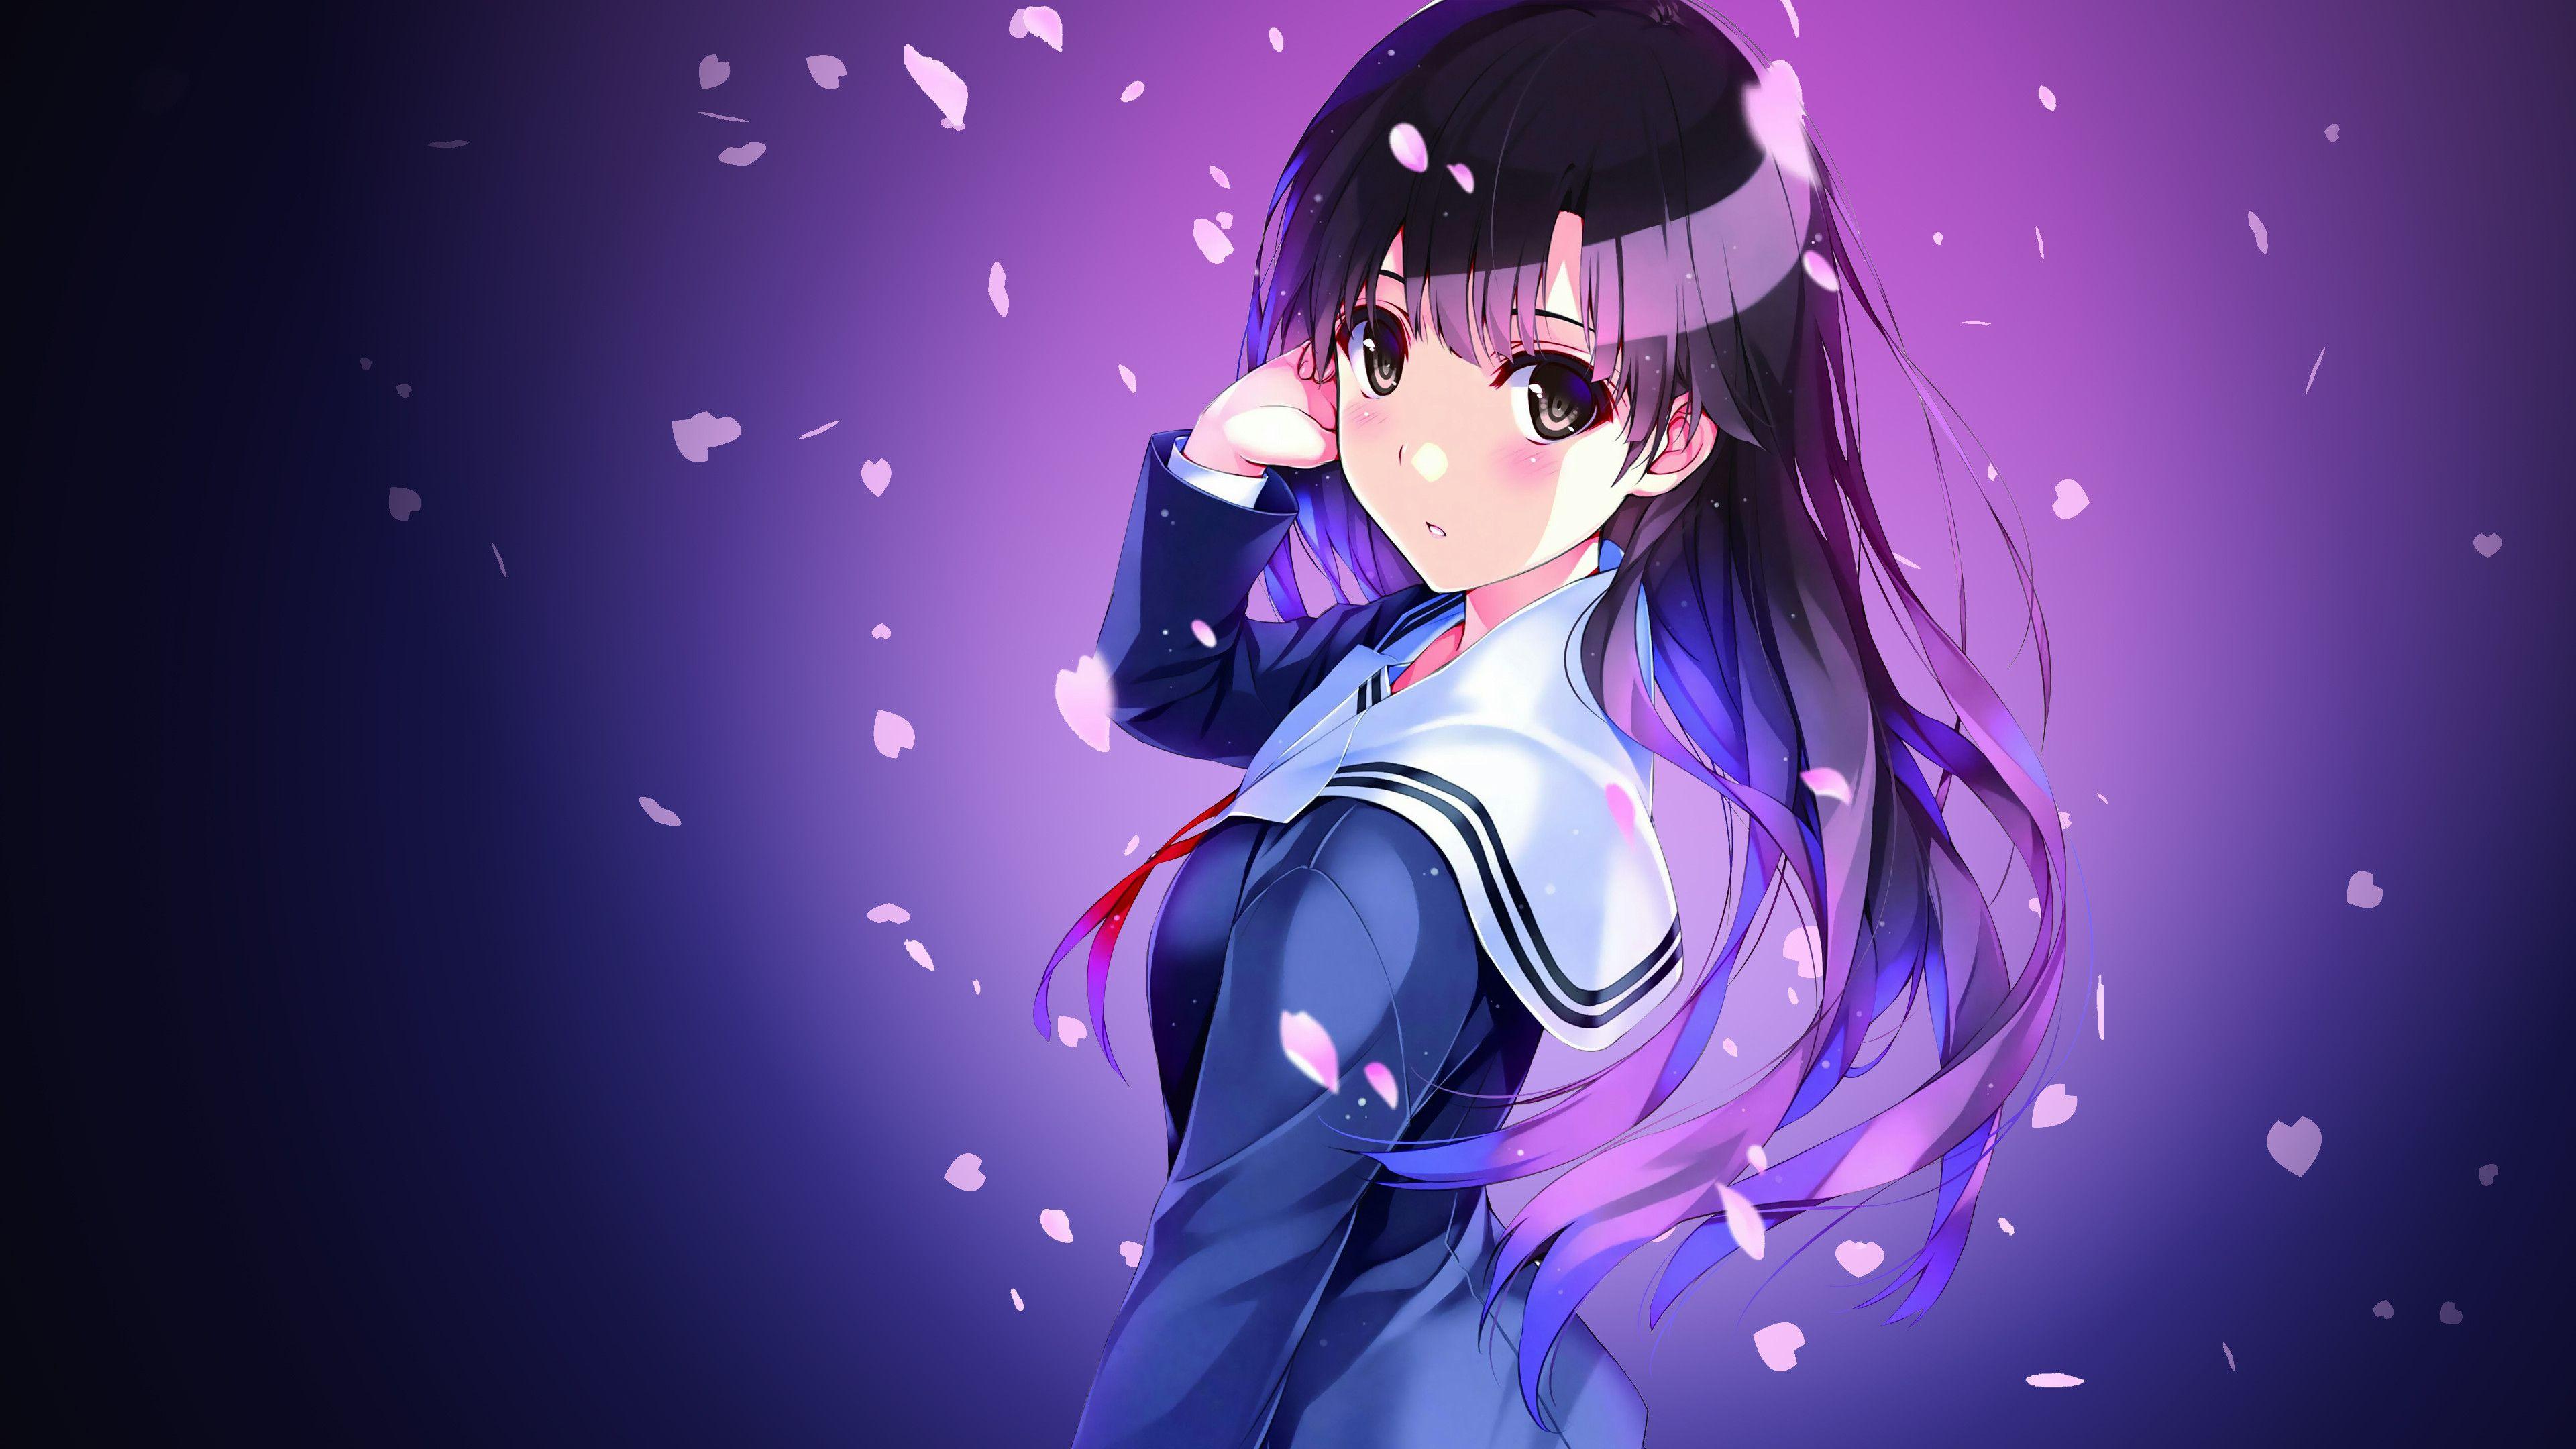 Live Anime 4K Wallpapers - Top Free ...